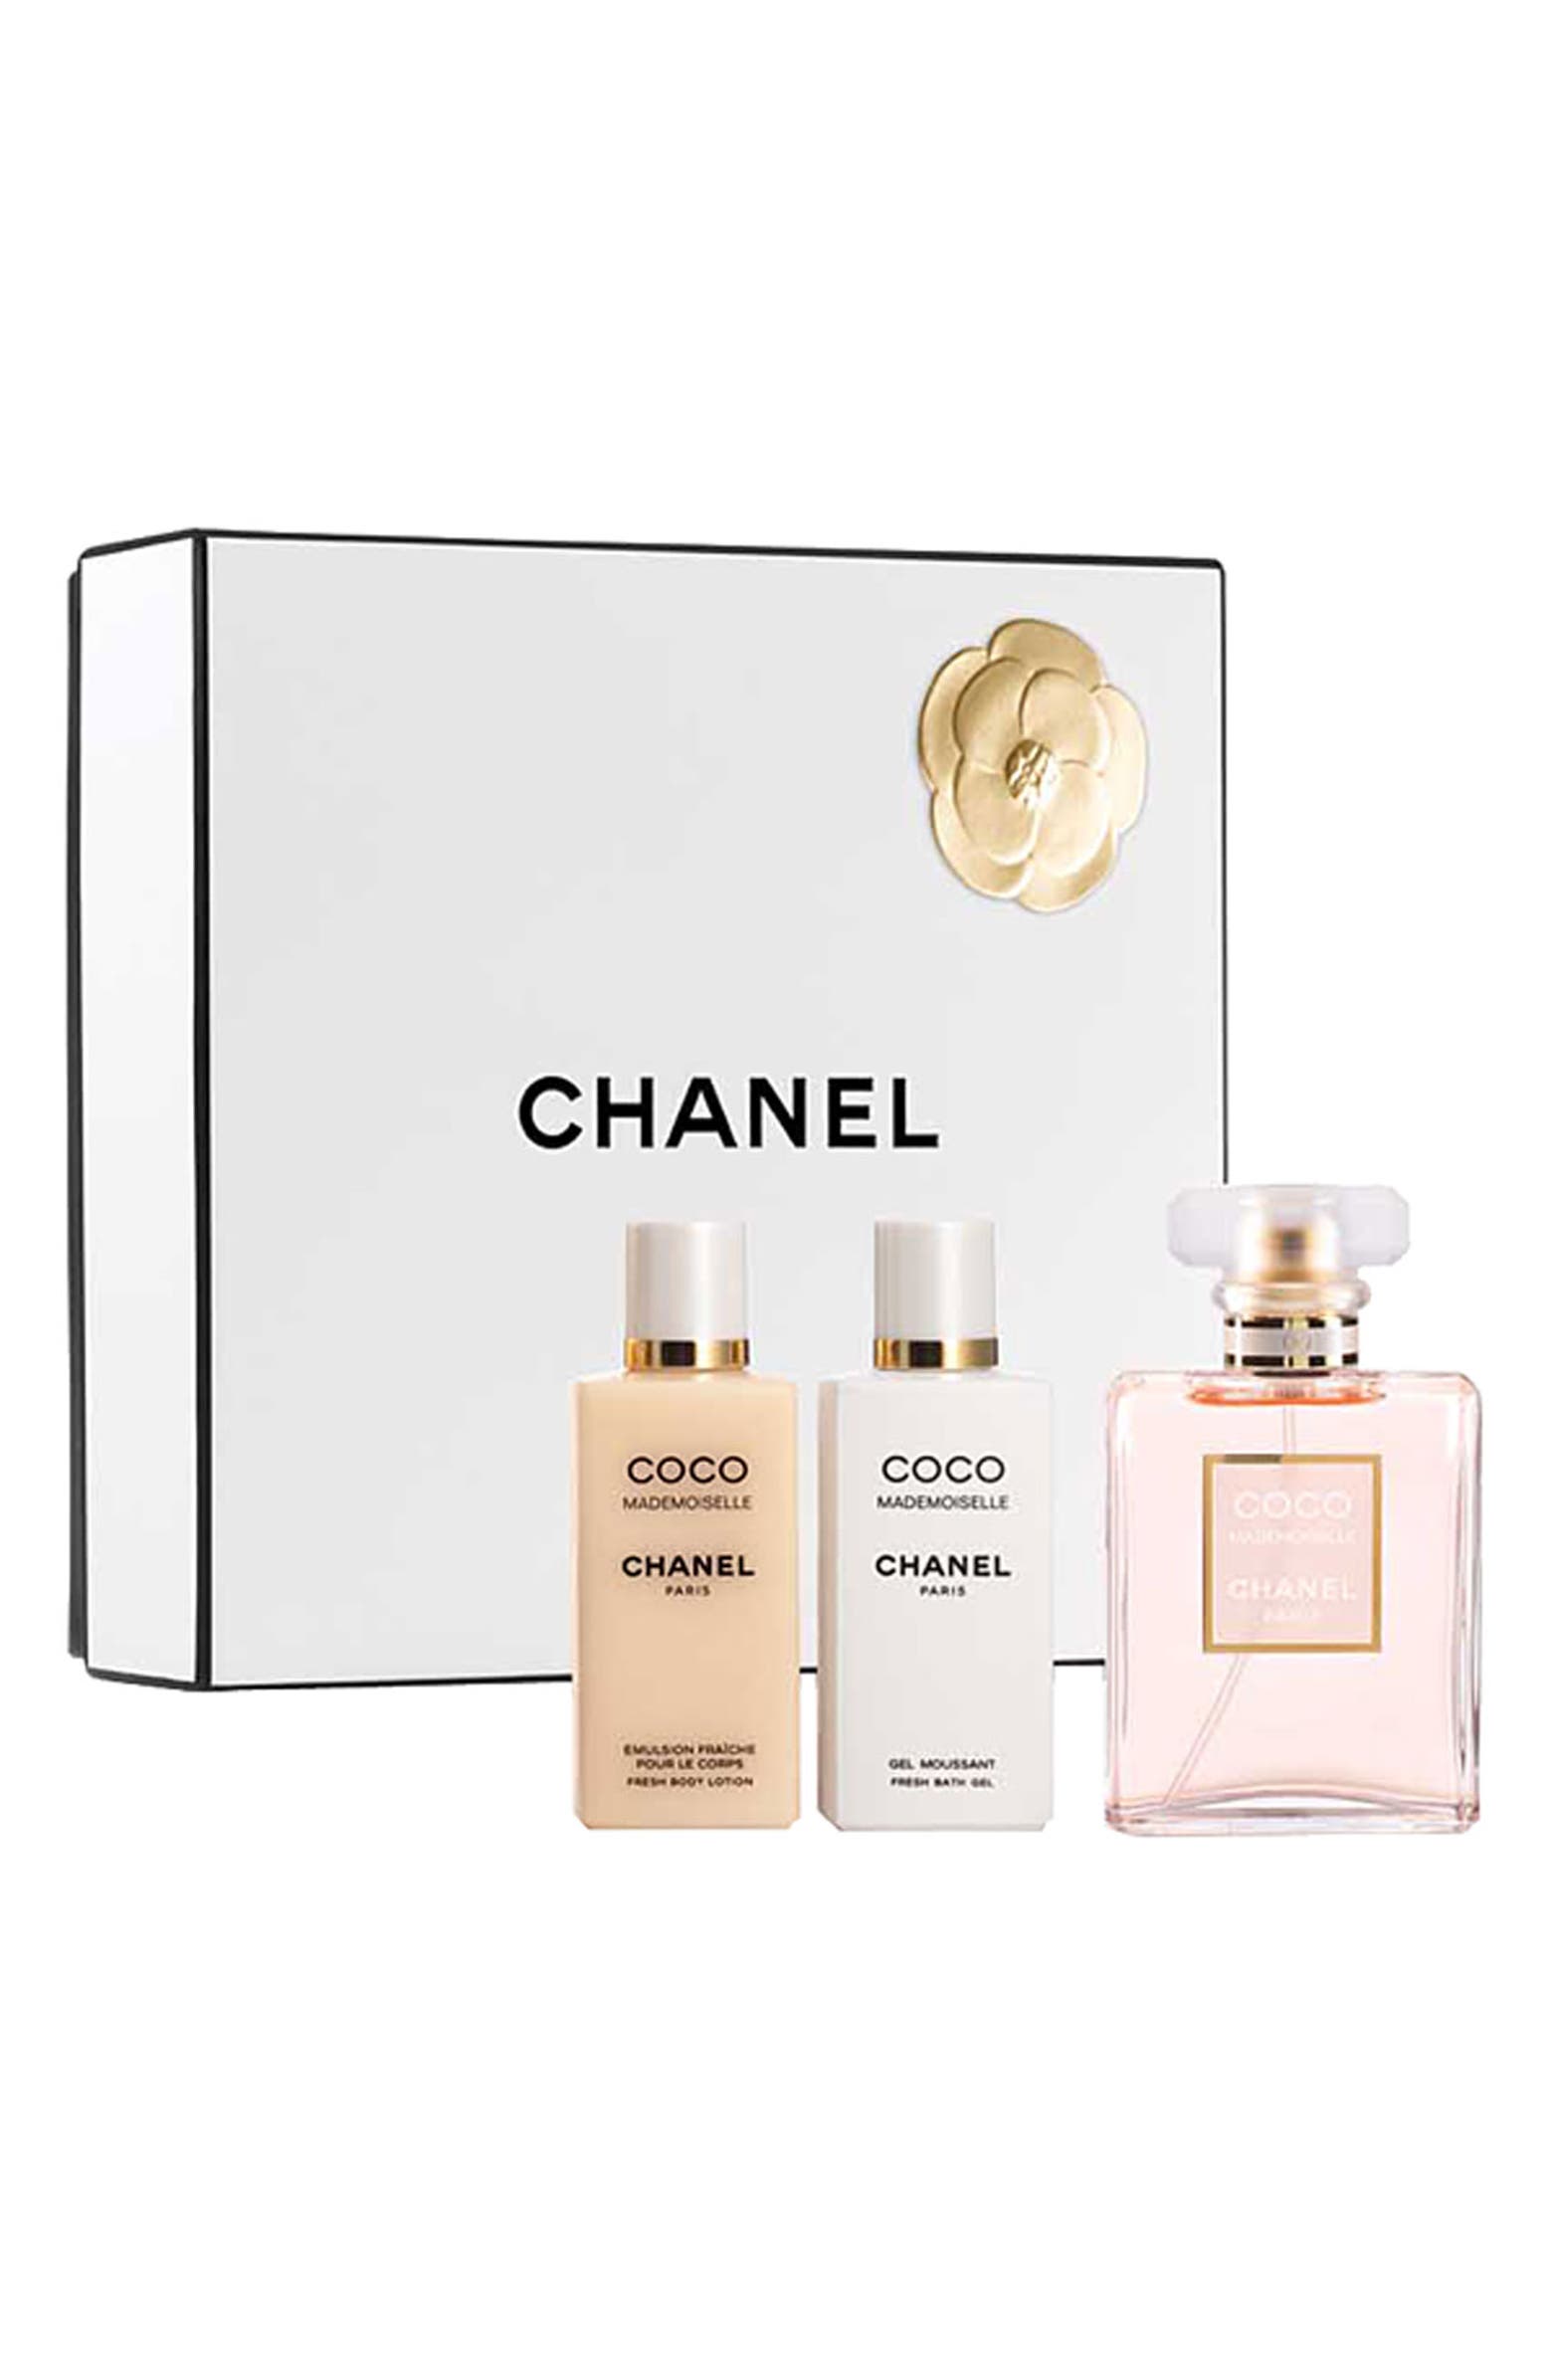 CHANEL COCO MADEMOISELLE SPIRITED AND SENSUAL GIFT SET